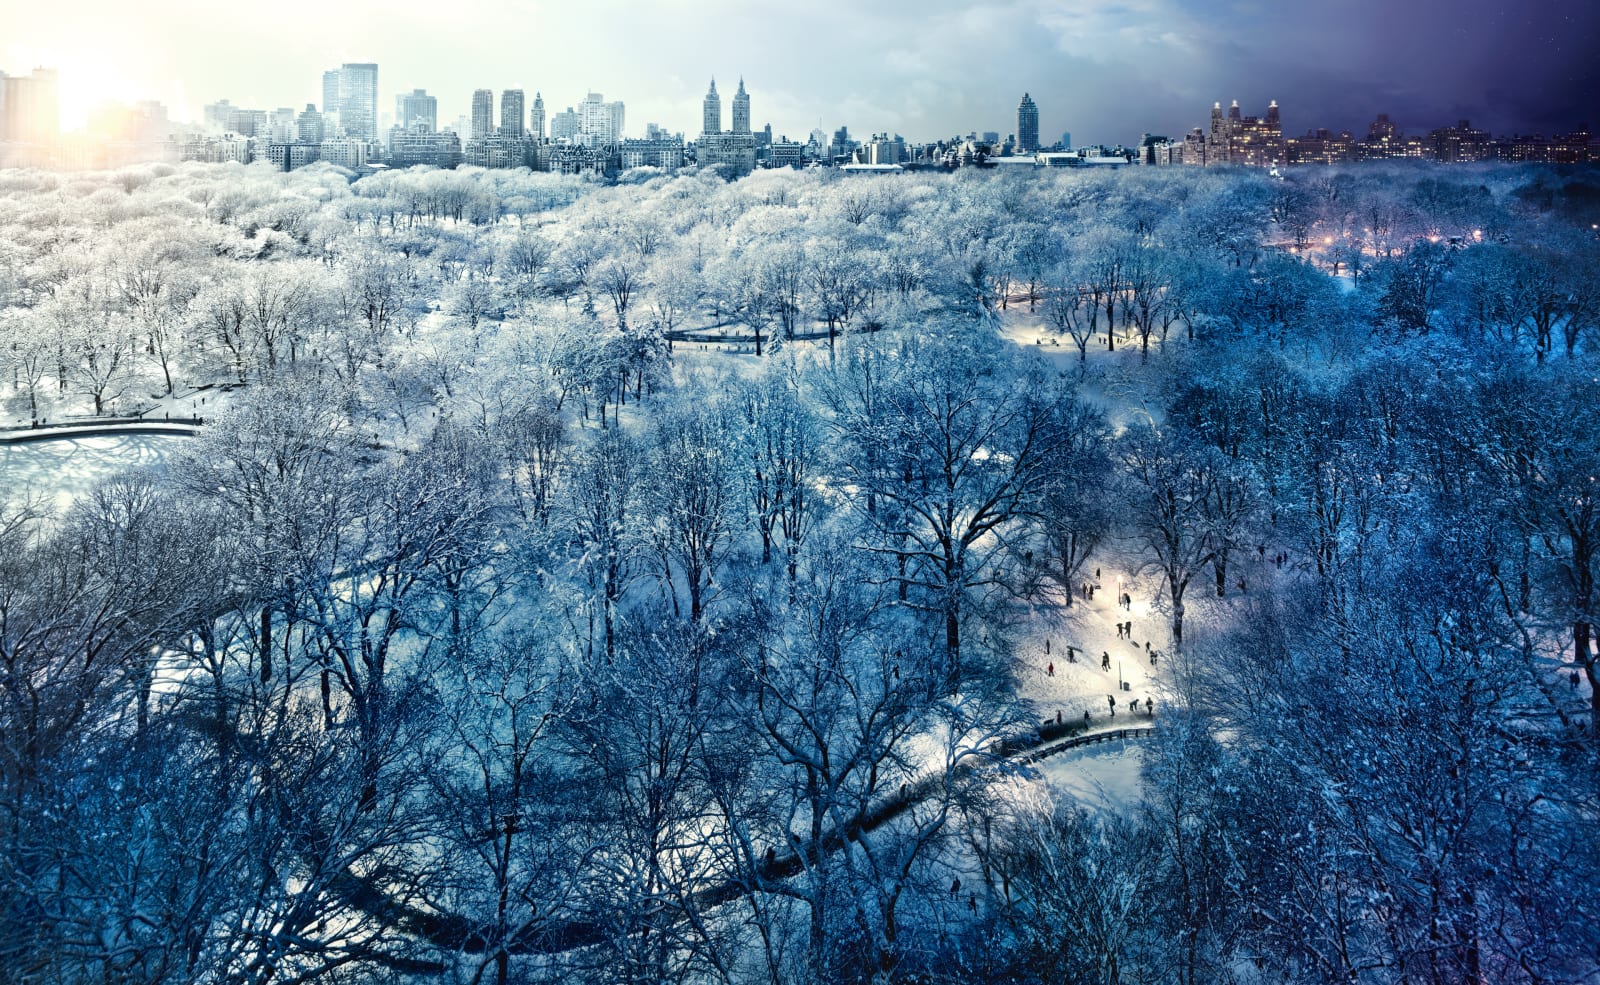 Stephen Wilkes, Central Park Snow NYC, Day to Night™, 2010